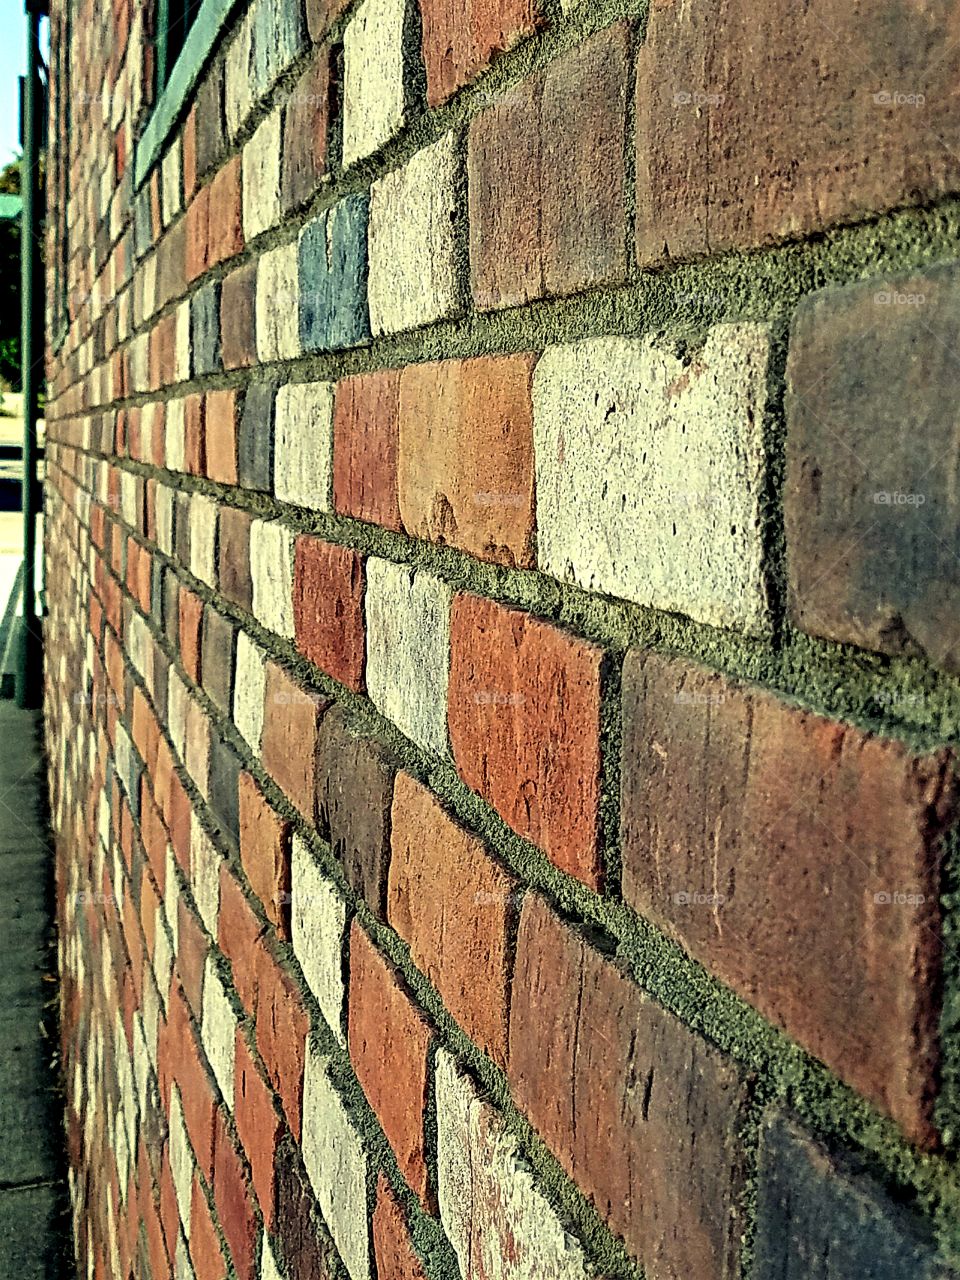 Looking down the side of an old brick wall.